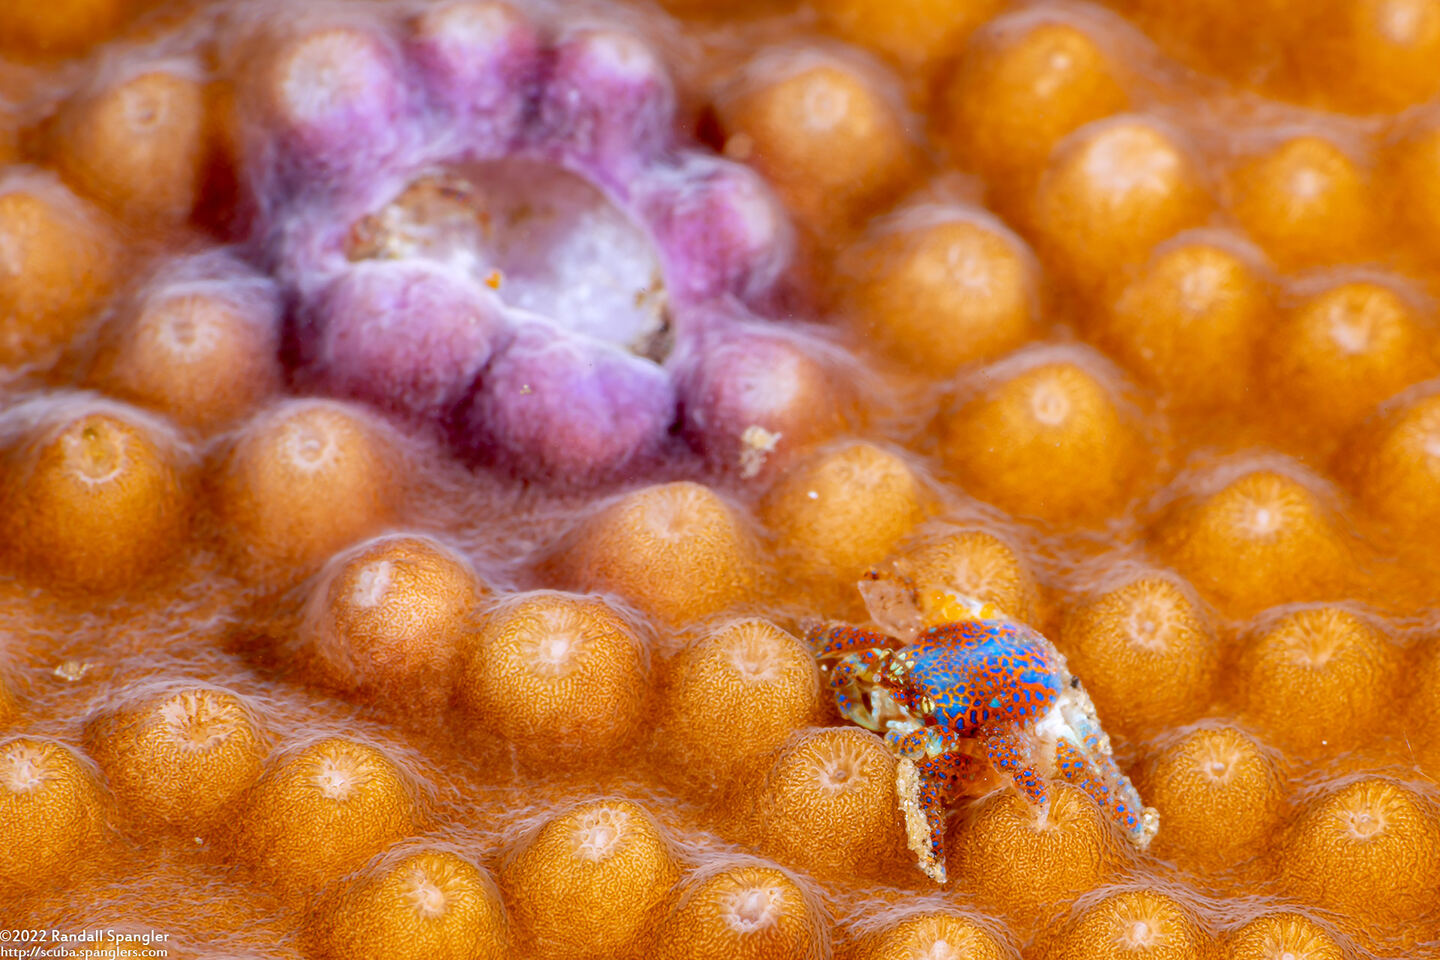 Pseudocryptochirus viridis (Coral Gall Crab); Crab with its burrow (gall) in coral